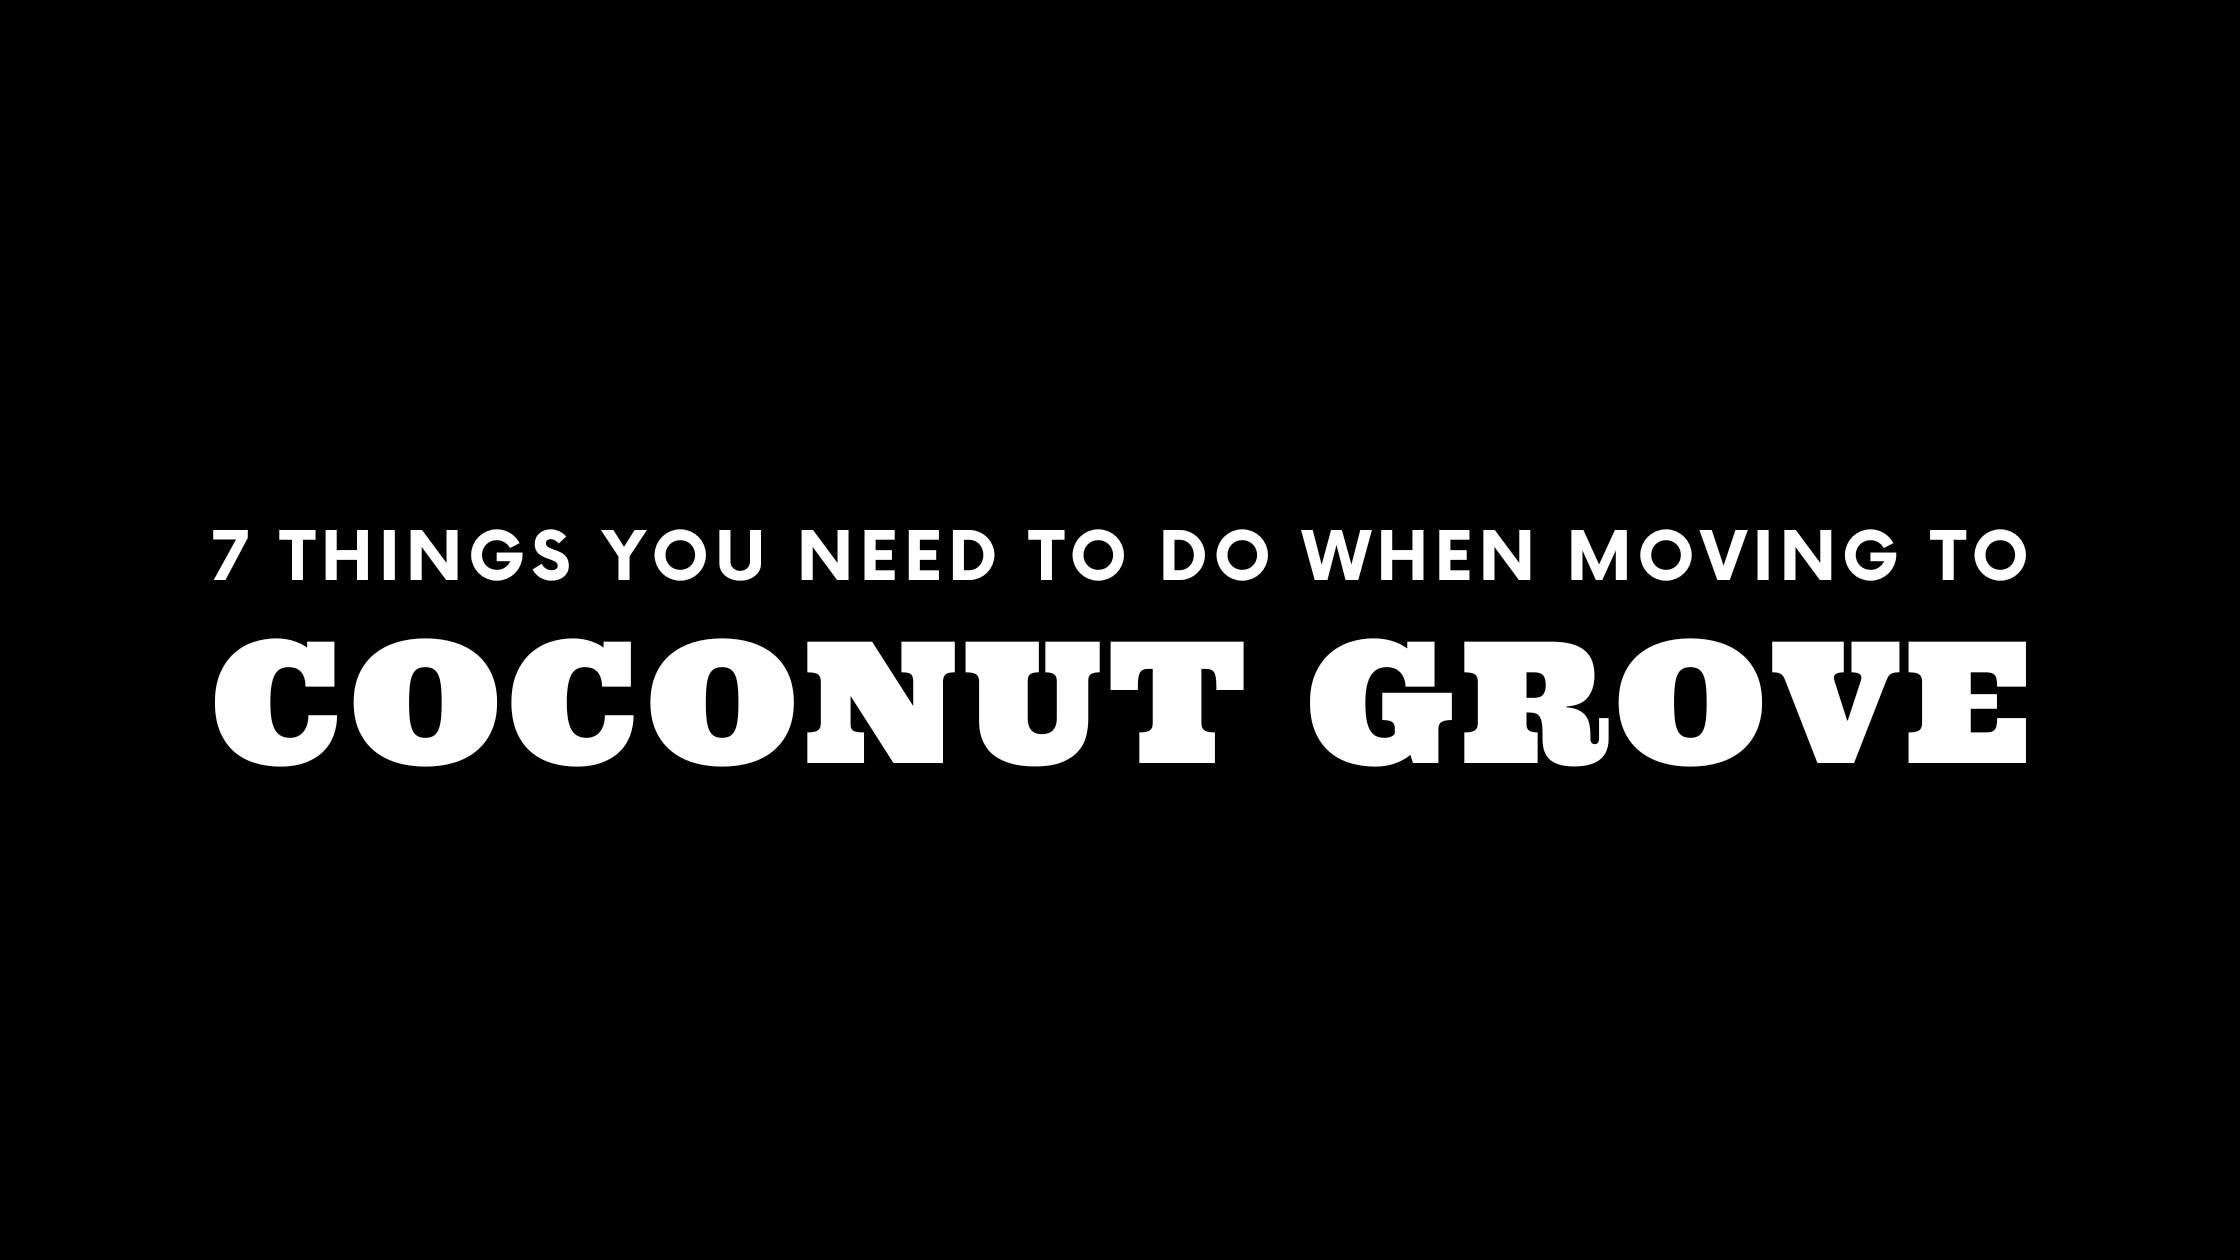 Moving to Coconut Grove? 7 Things You Need To Do Immediately!